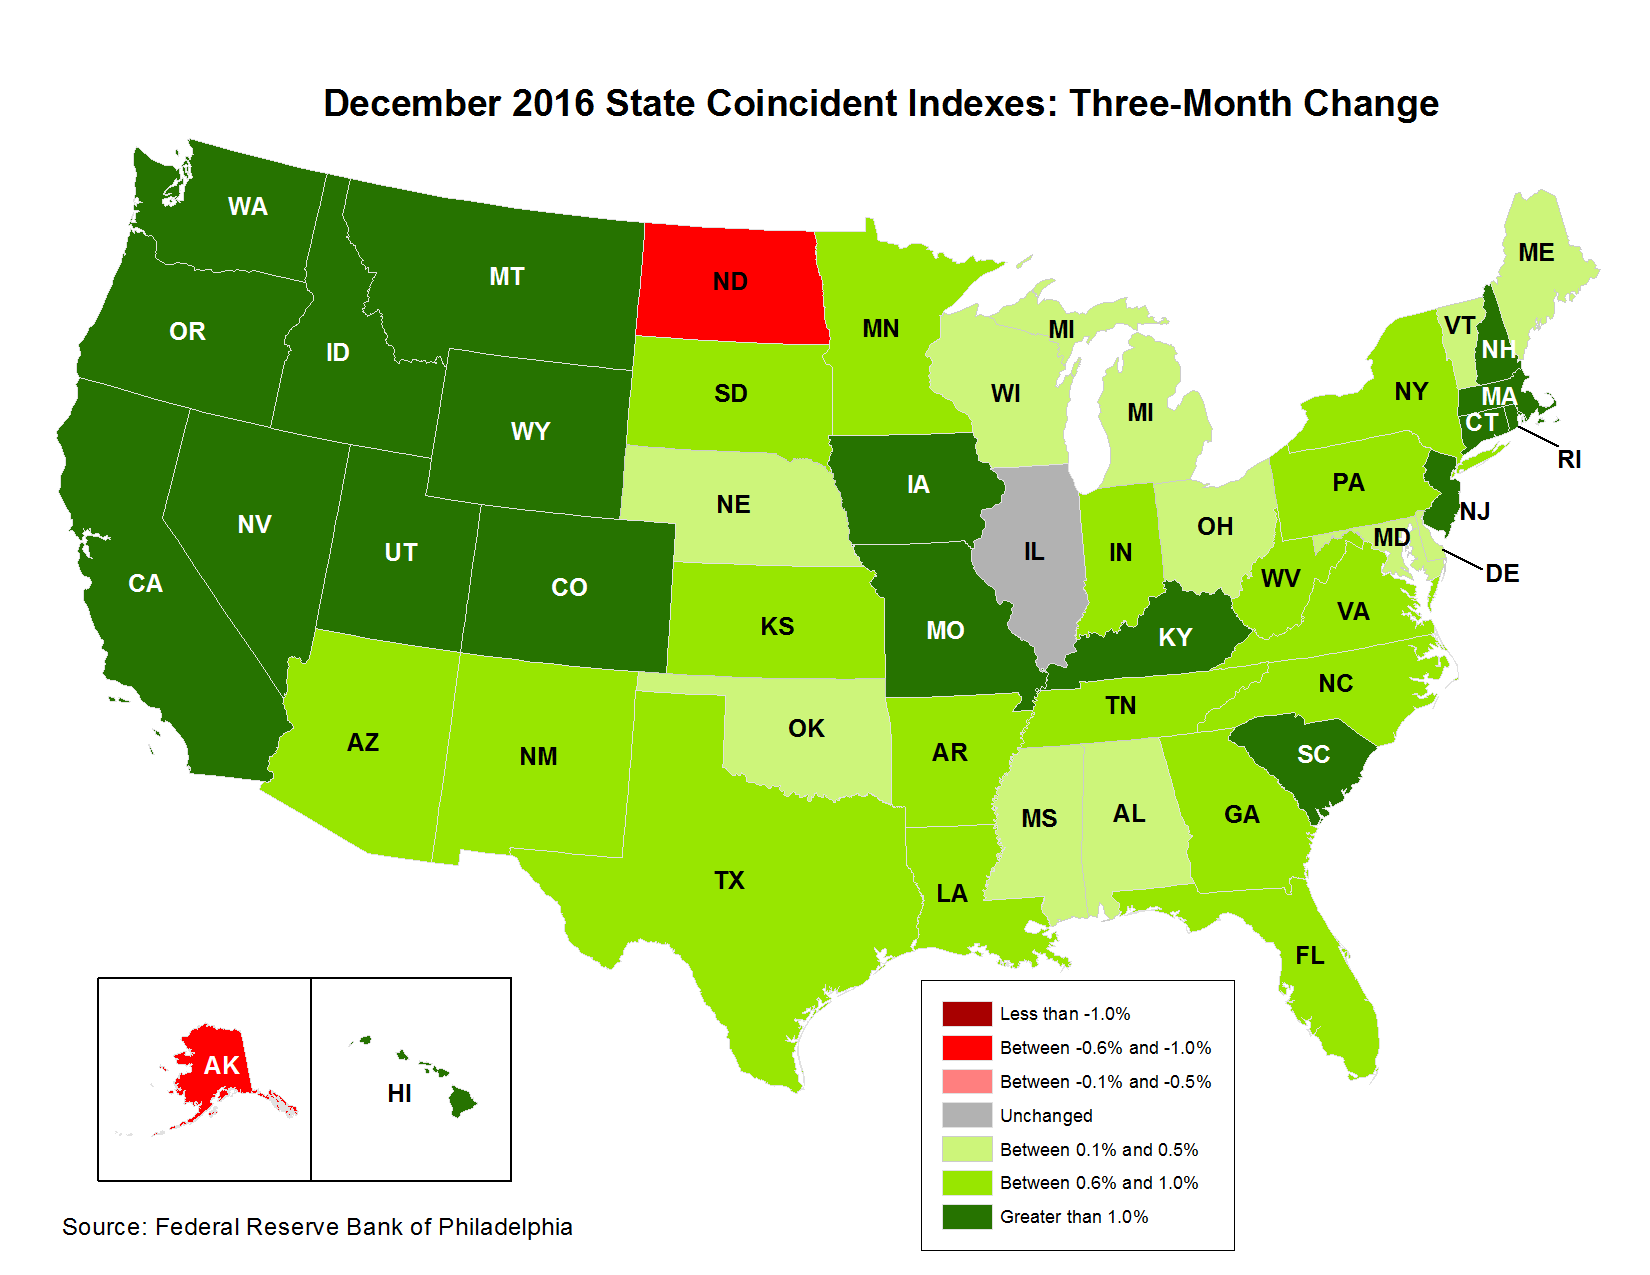 Map of the U.S. showing the State Coincident Indexes Three-Month Change in December 2016